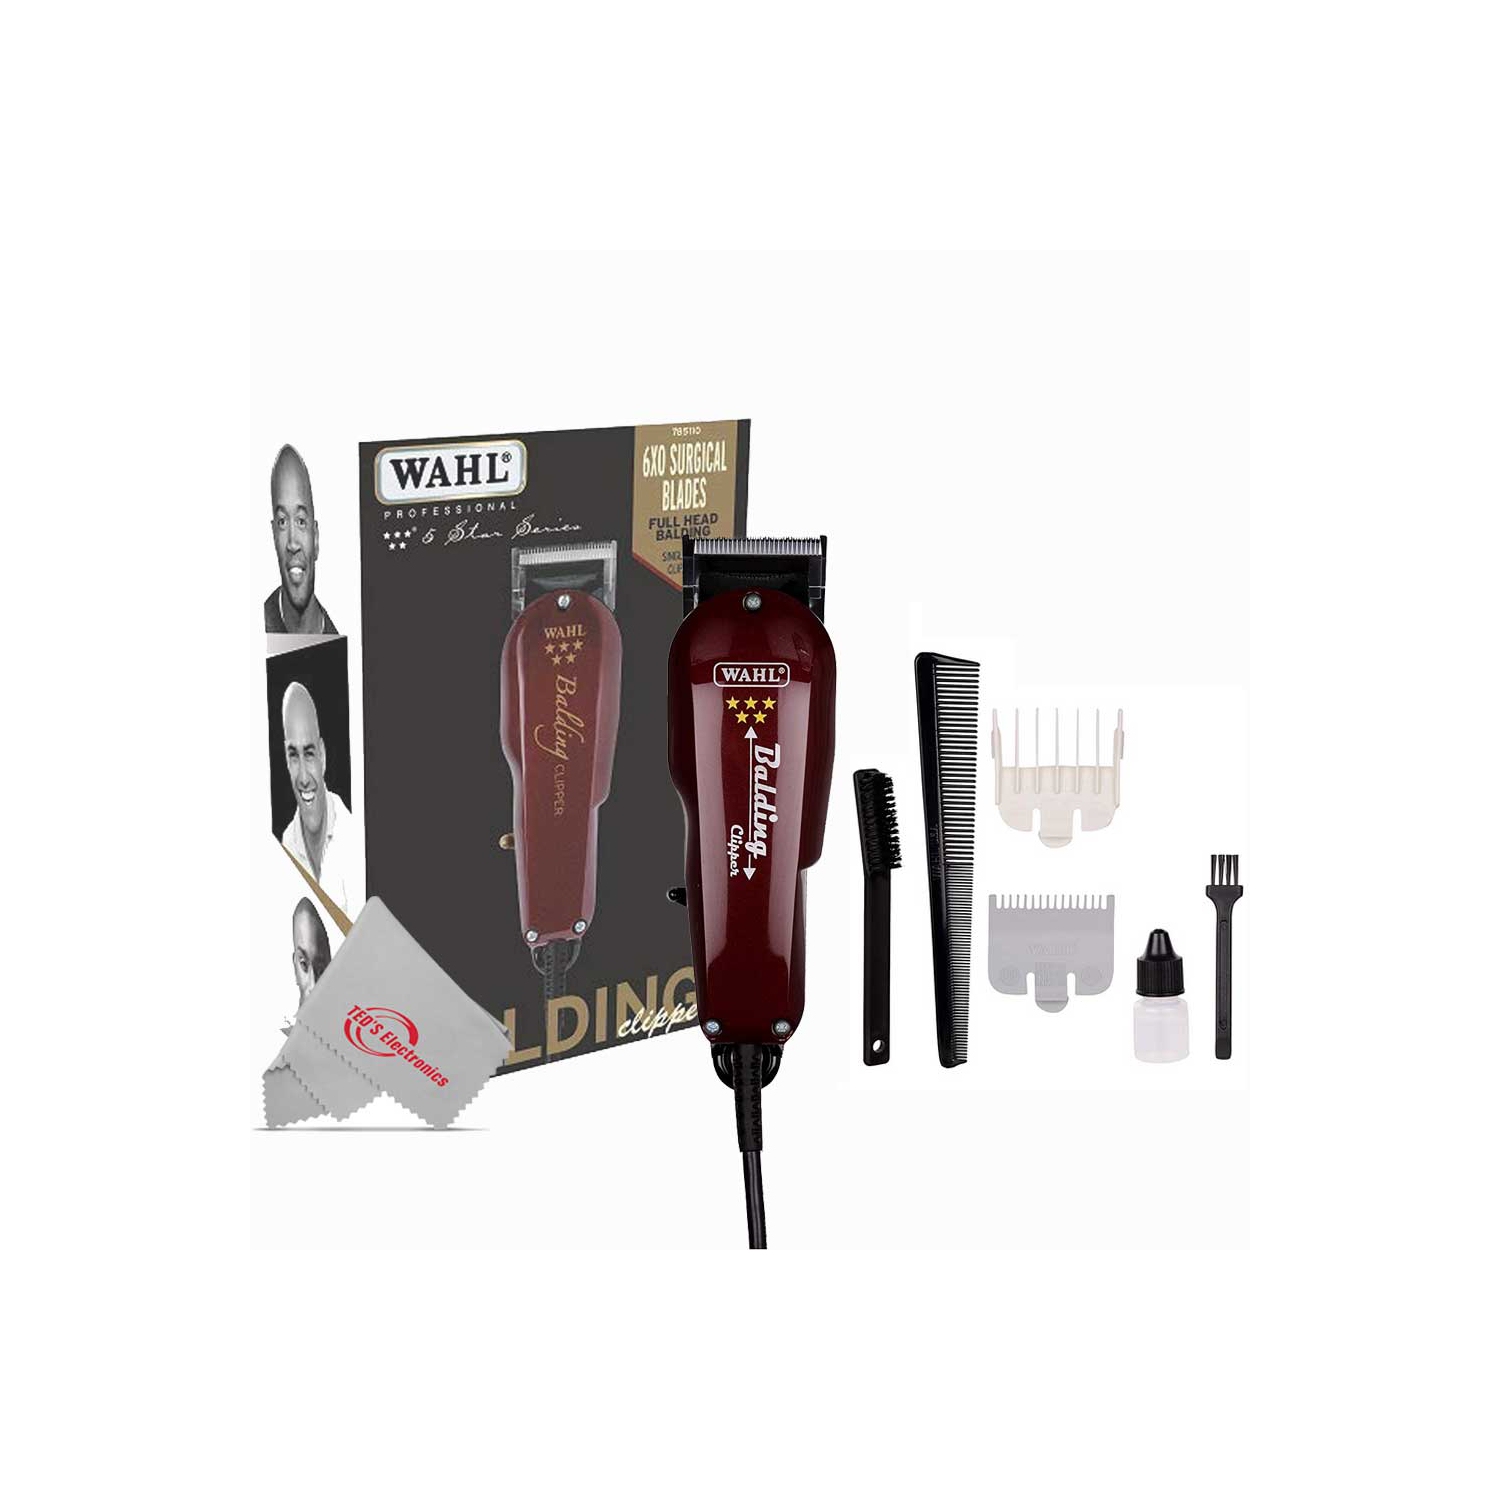 Wahl 8110 Professional 5-Star Balding Clipper - Red